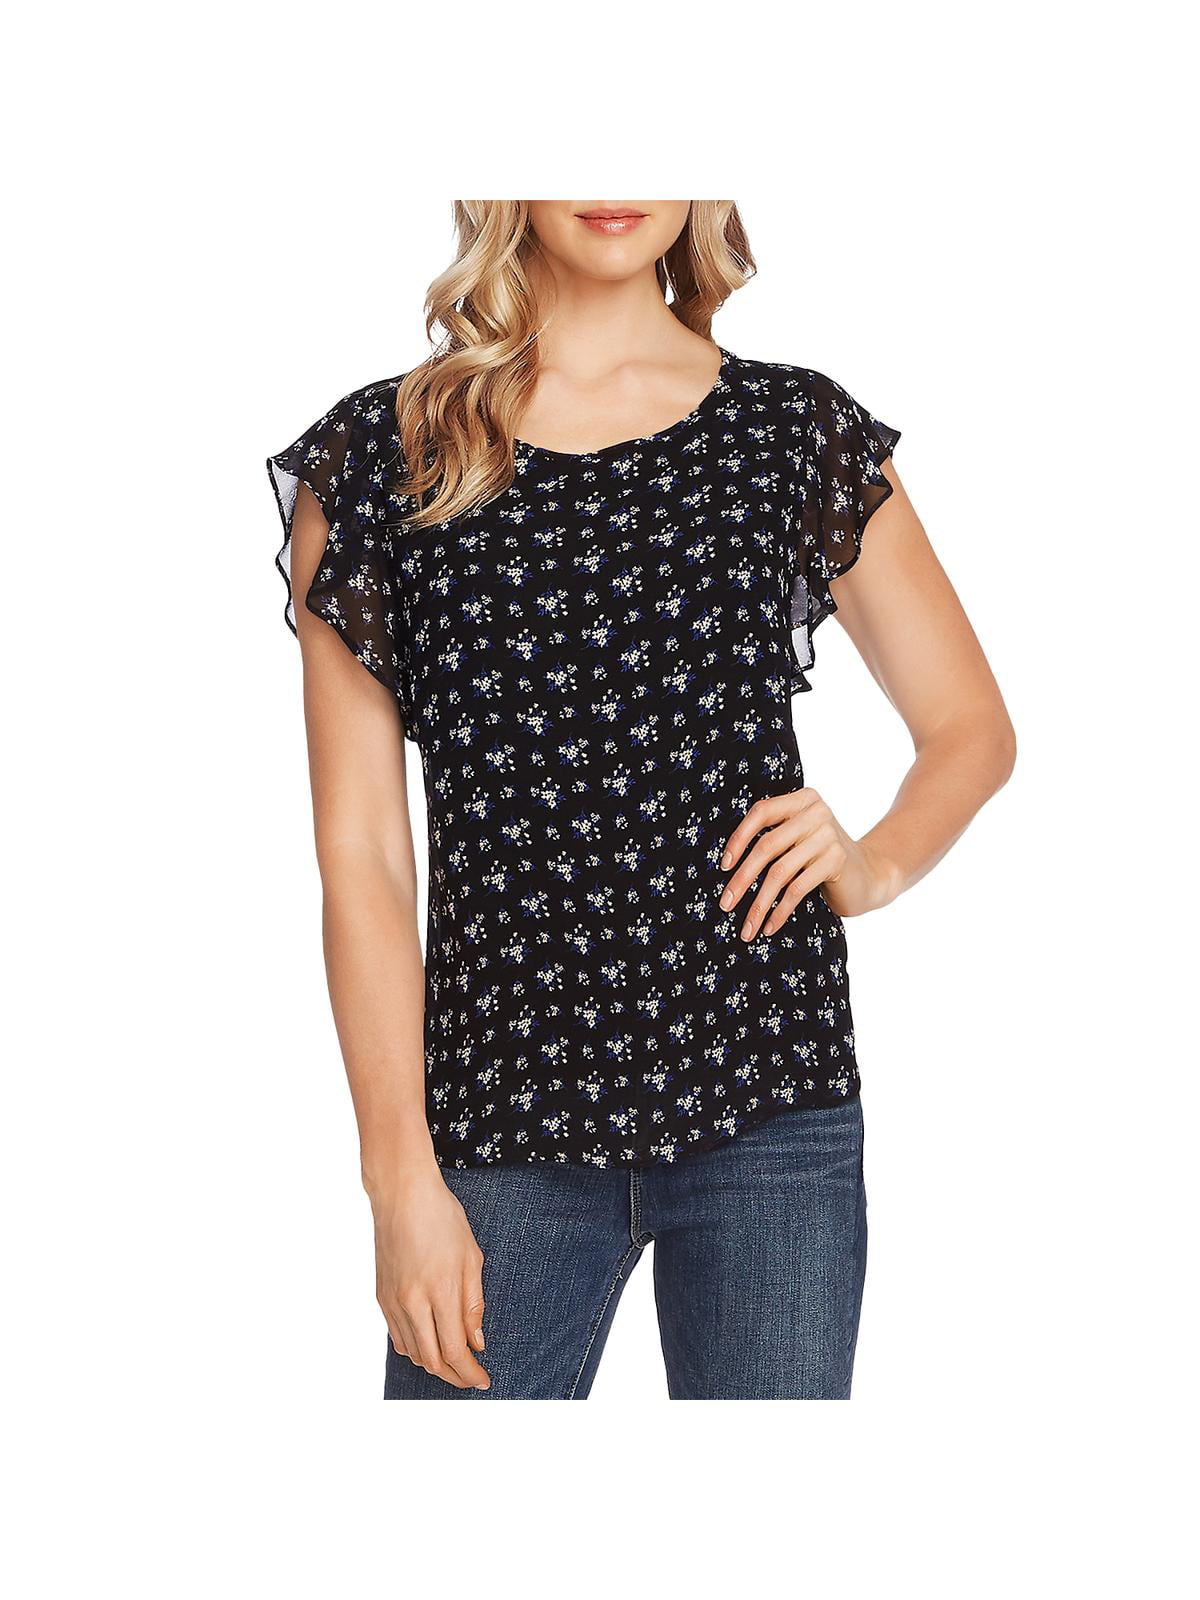 Vince Camuto Womens Printed High-Low Blouse Rich Black, XS